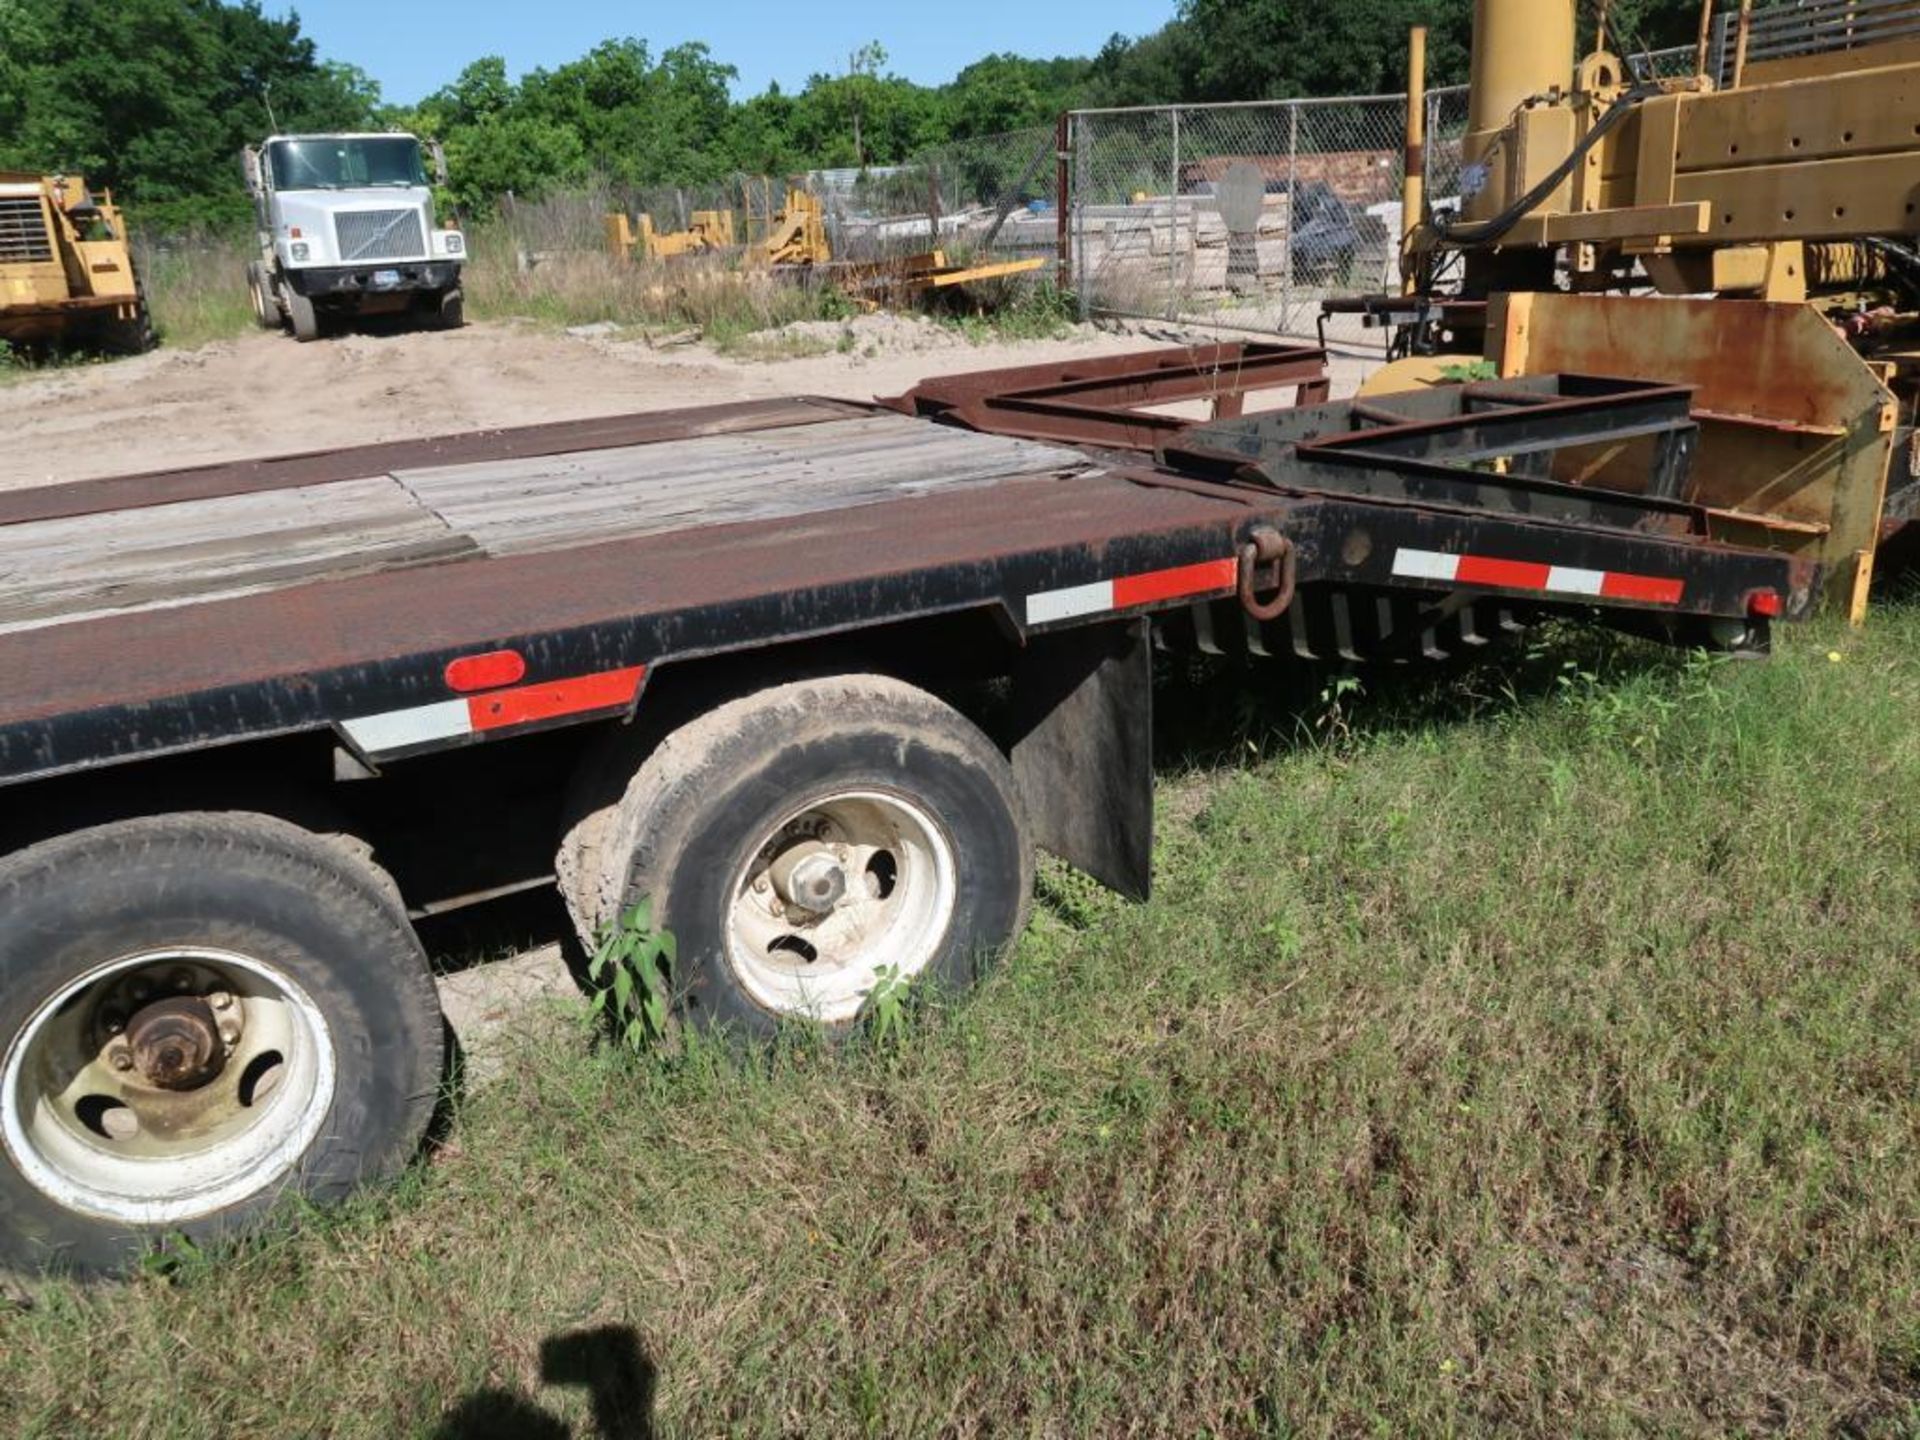 1996 Ameritrail 20 ft. Utility Trailer, VIN 17YBP2523TB014245, with Fold-Down Ramps - Image 3 of 4